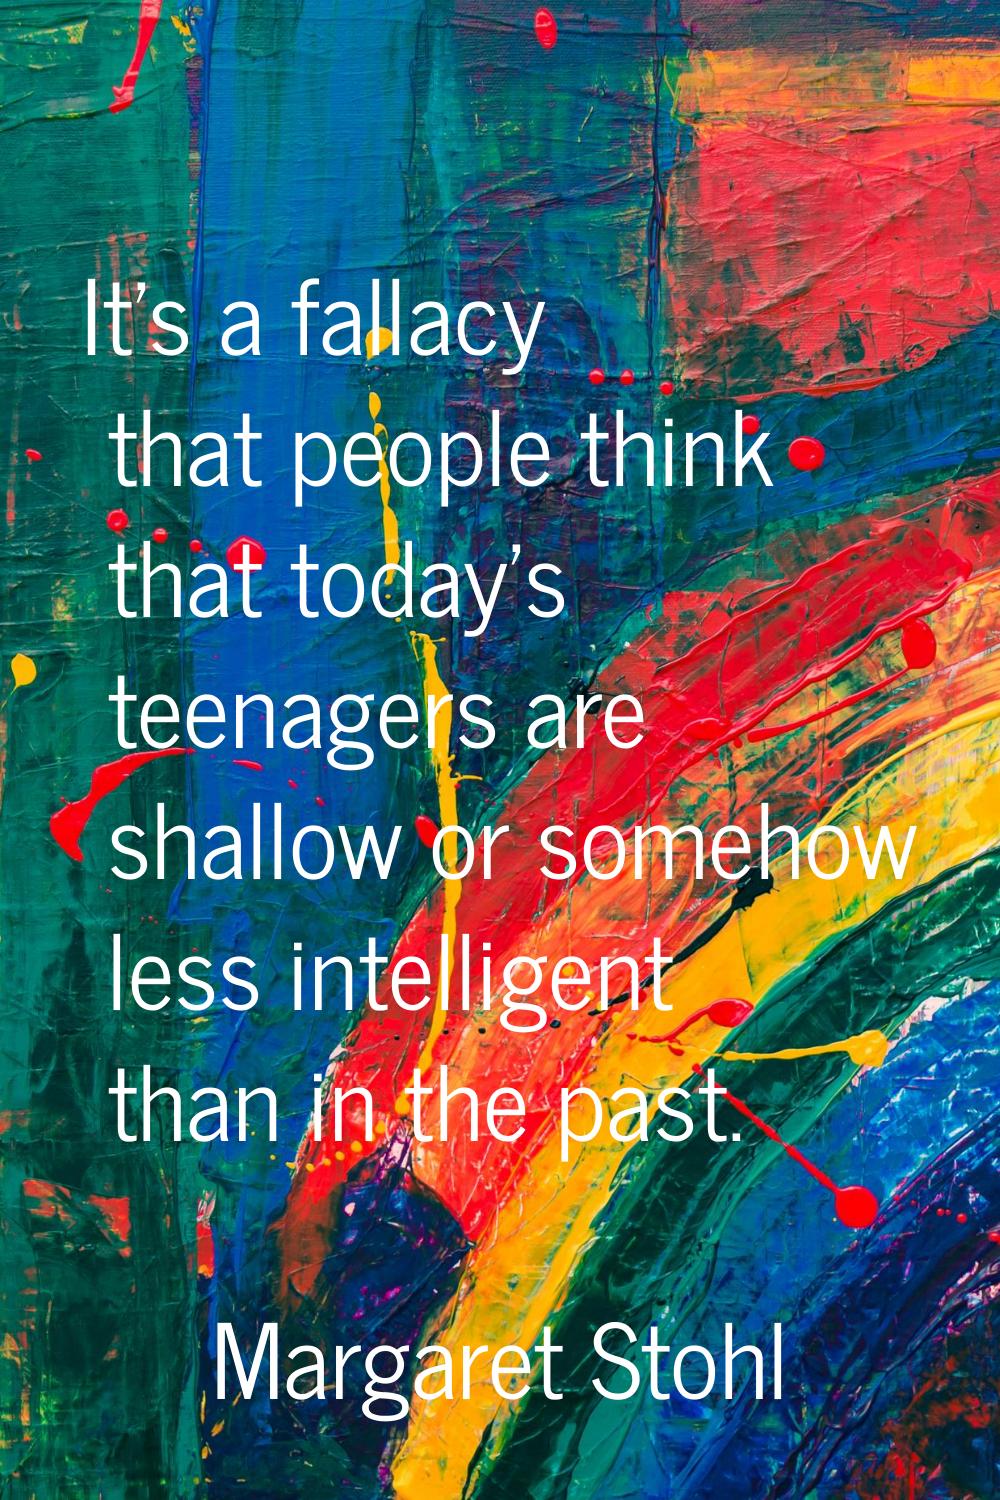 It's a fallacy that people think that today's teenagers are shallow or somehow less intelligent tha